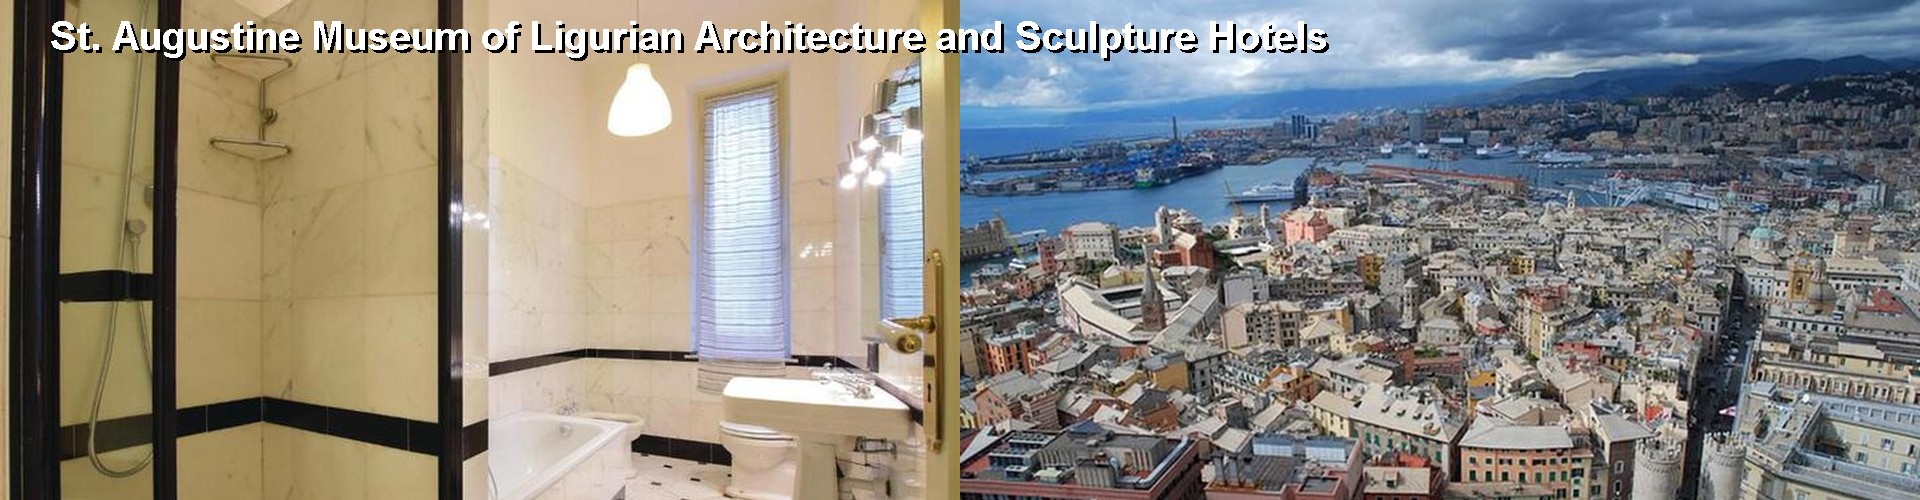 5 Best Hotels near St. Augustine Museum of Ligurian Architecture and Sculpture